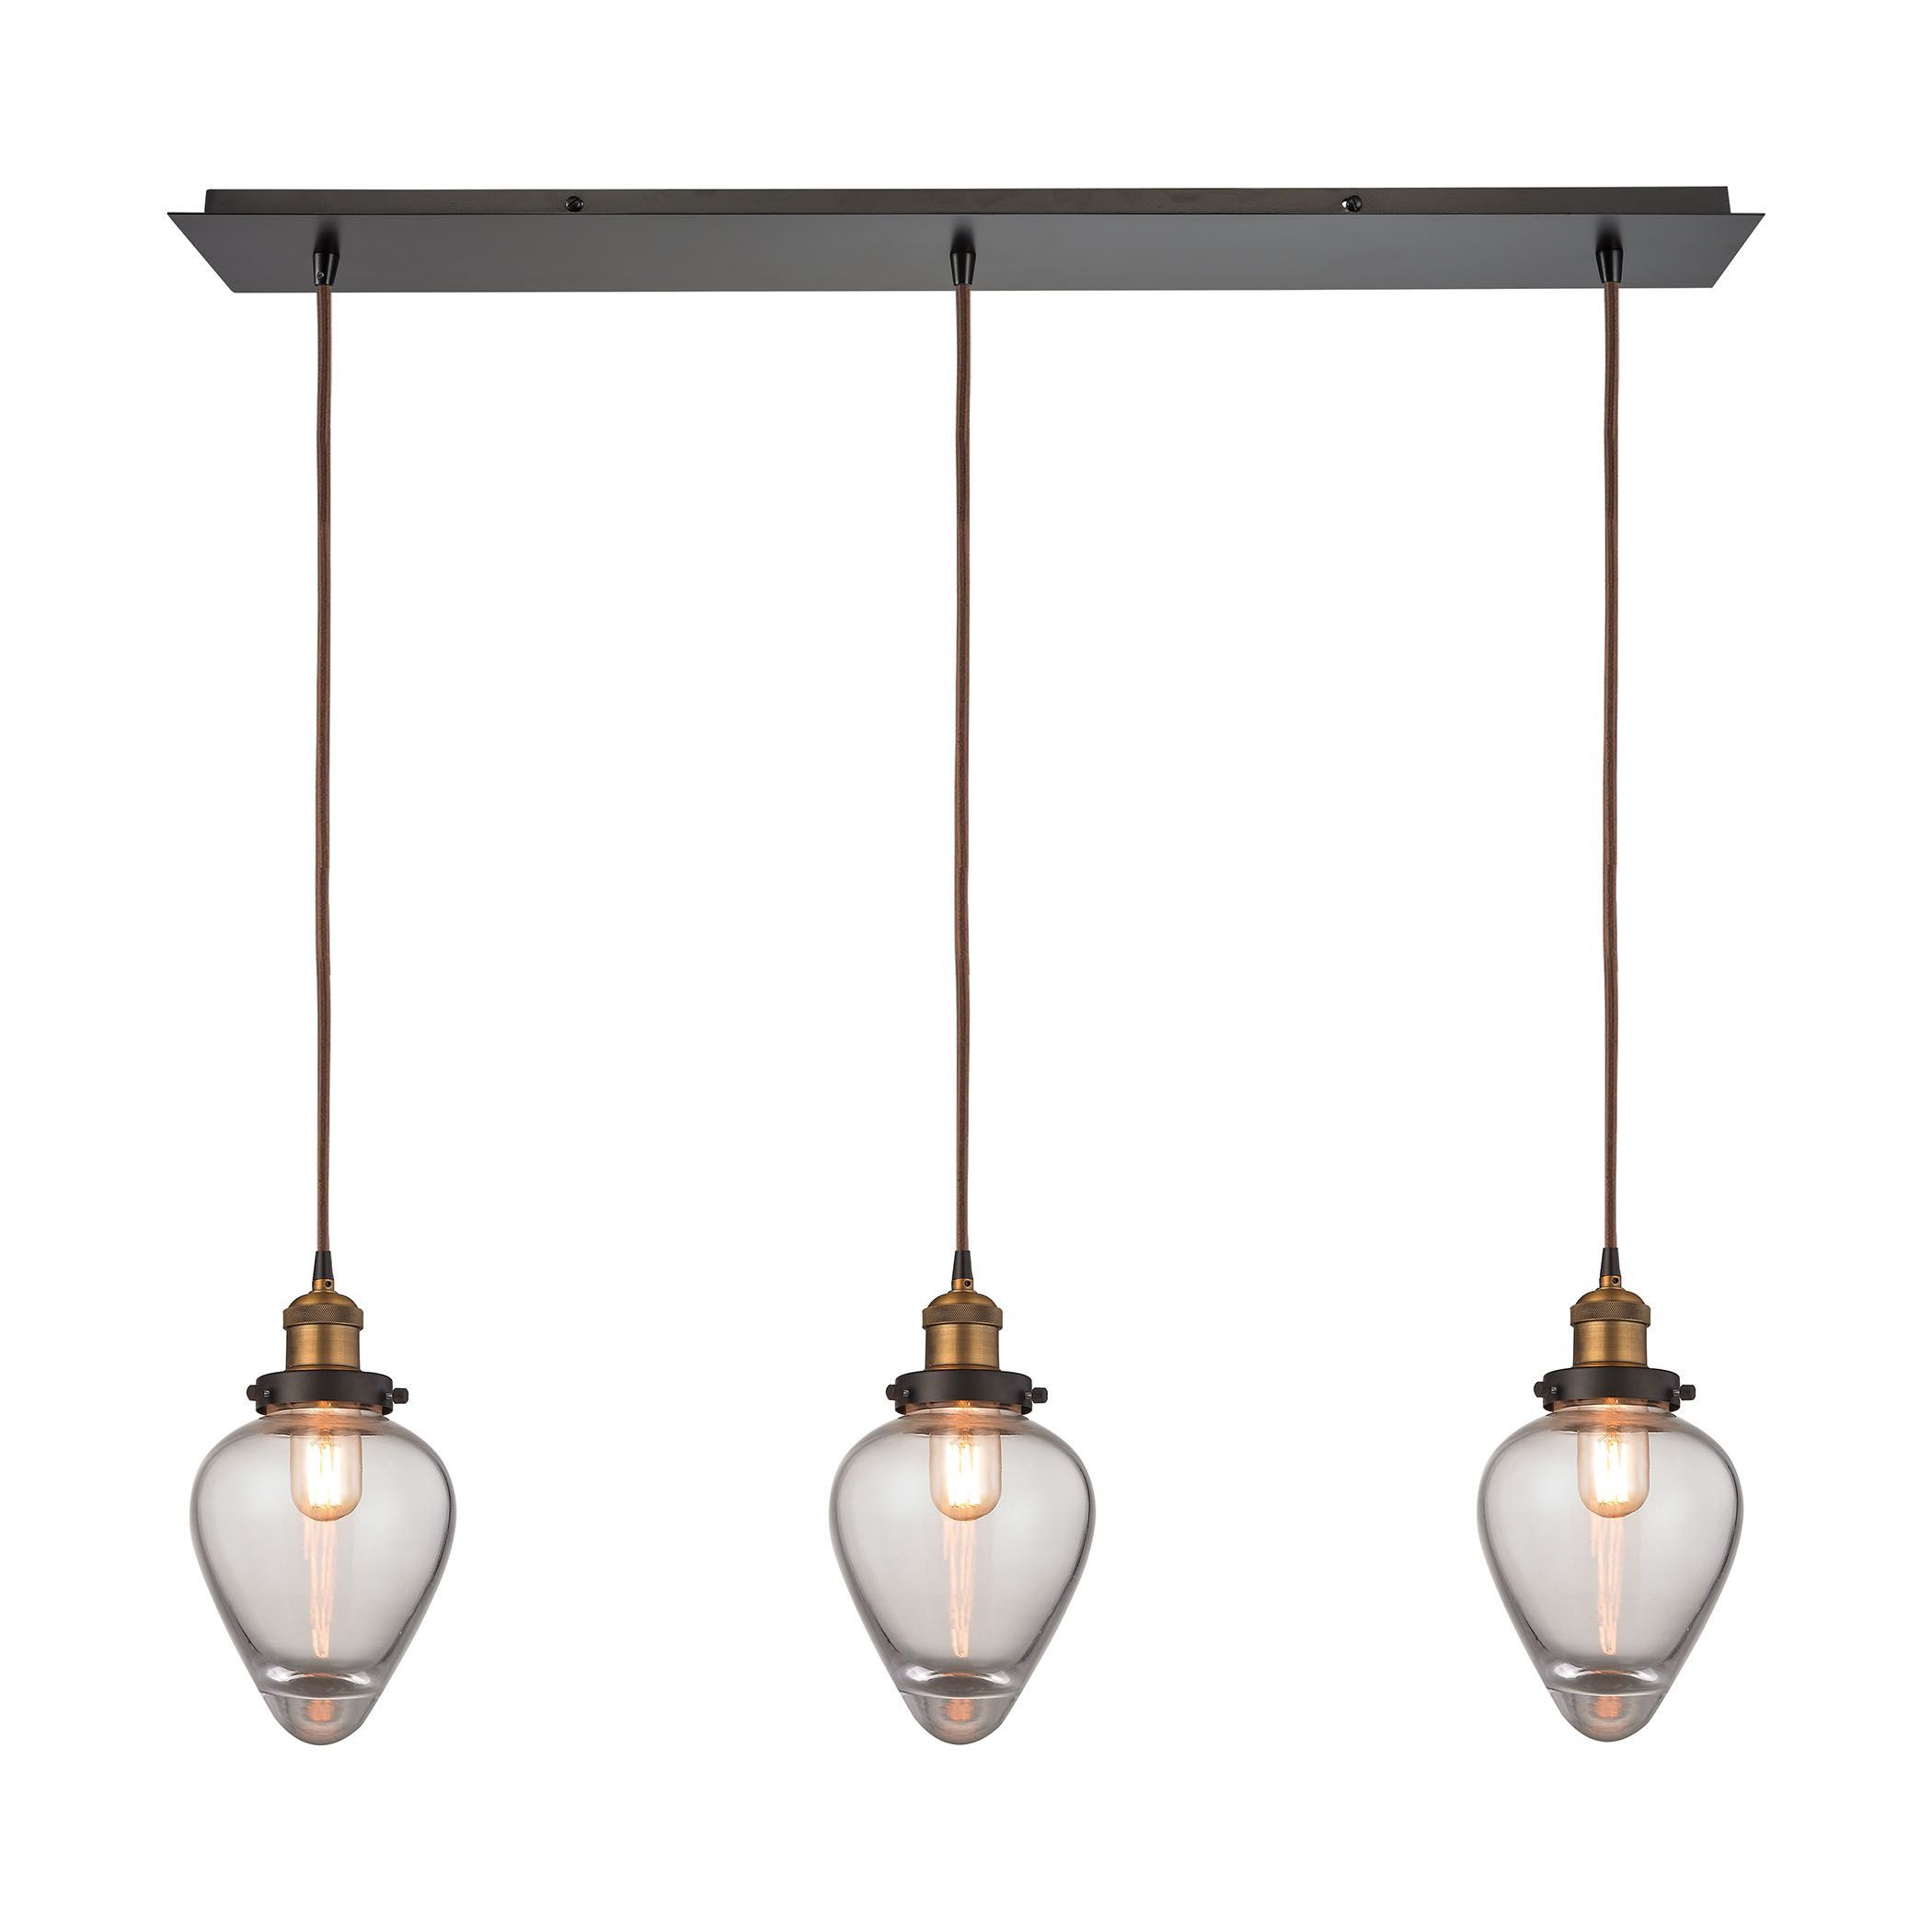 Elk Lighting 16325 3lp Bartram 3 Light Ceiling Pendant Throughout Textured Glass And Oil Rubbed Bronze Metal Pendant Lights (View 12 of 15)